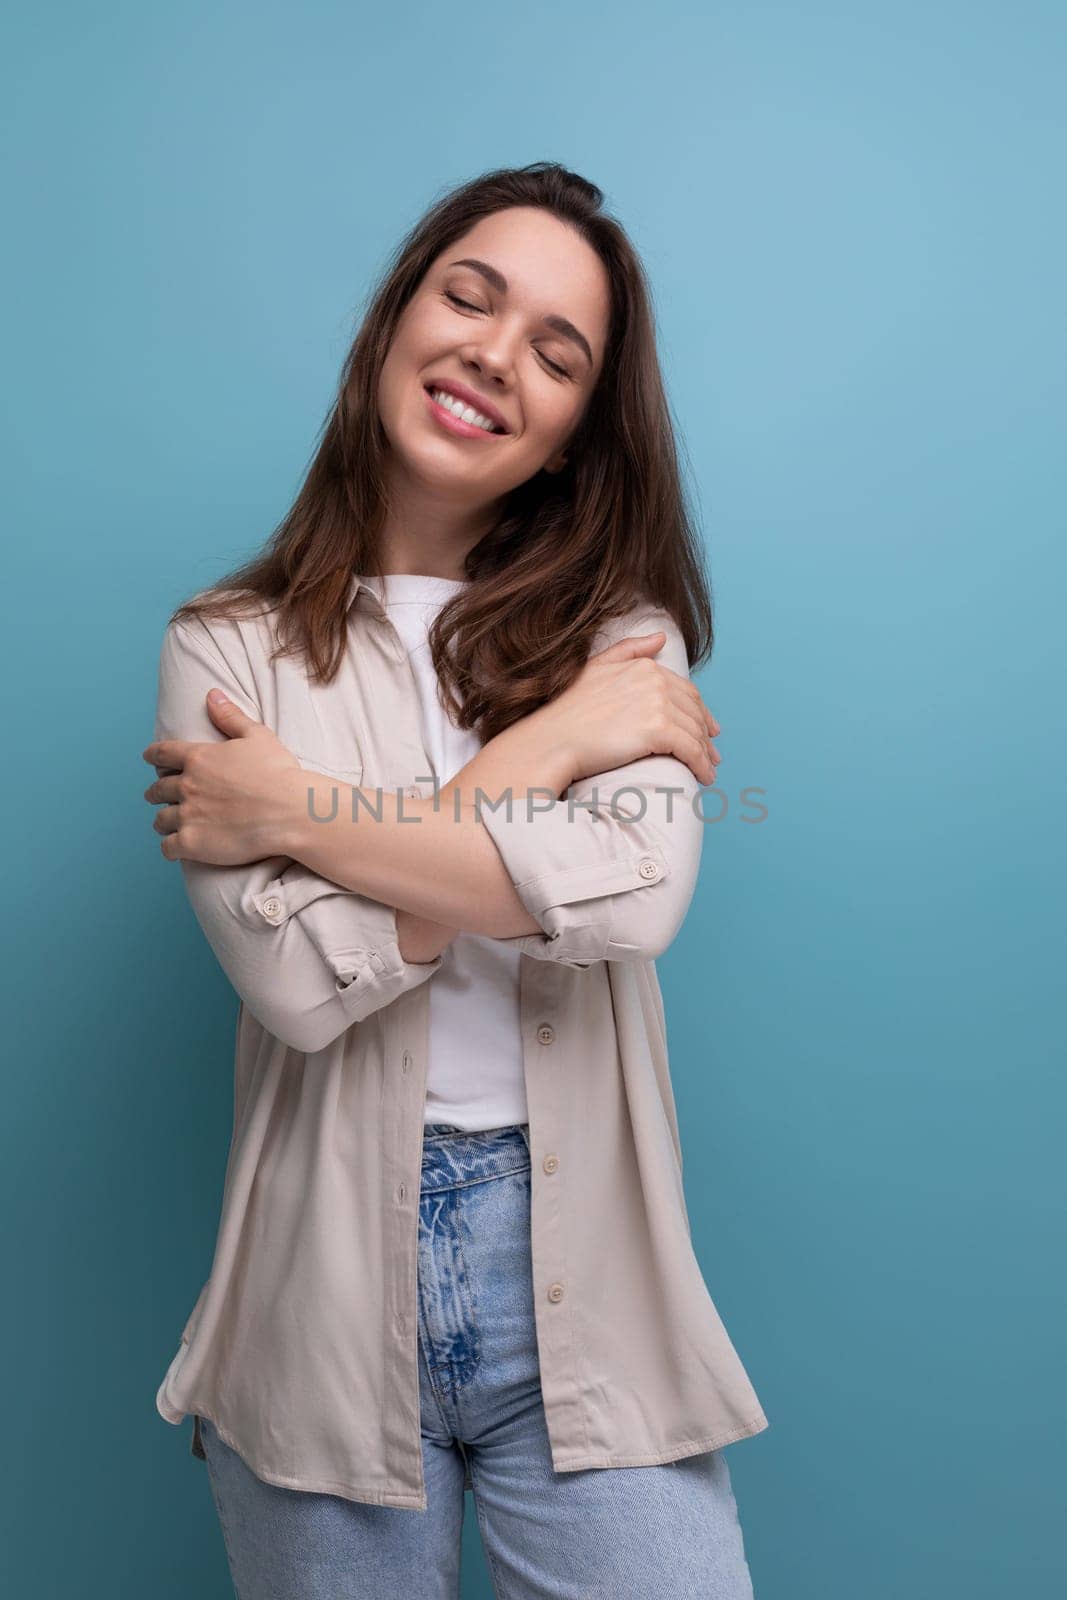 romantic dreaming european young brunette woman in shirt and jeans on blue background by TRMK